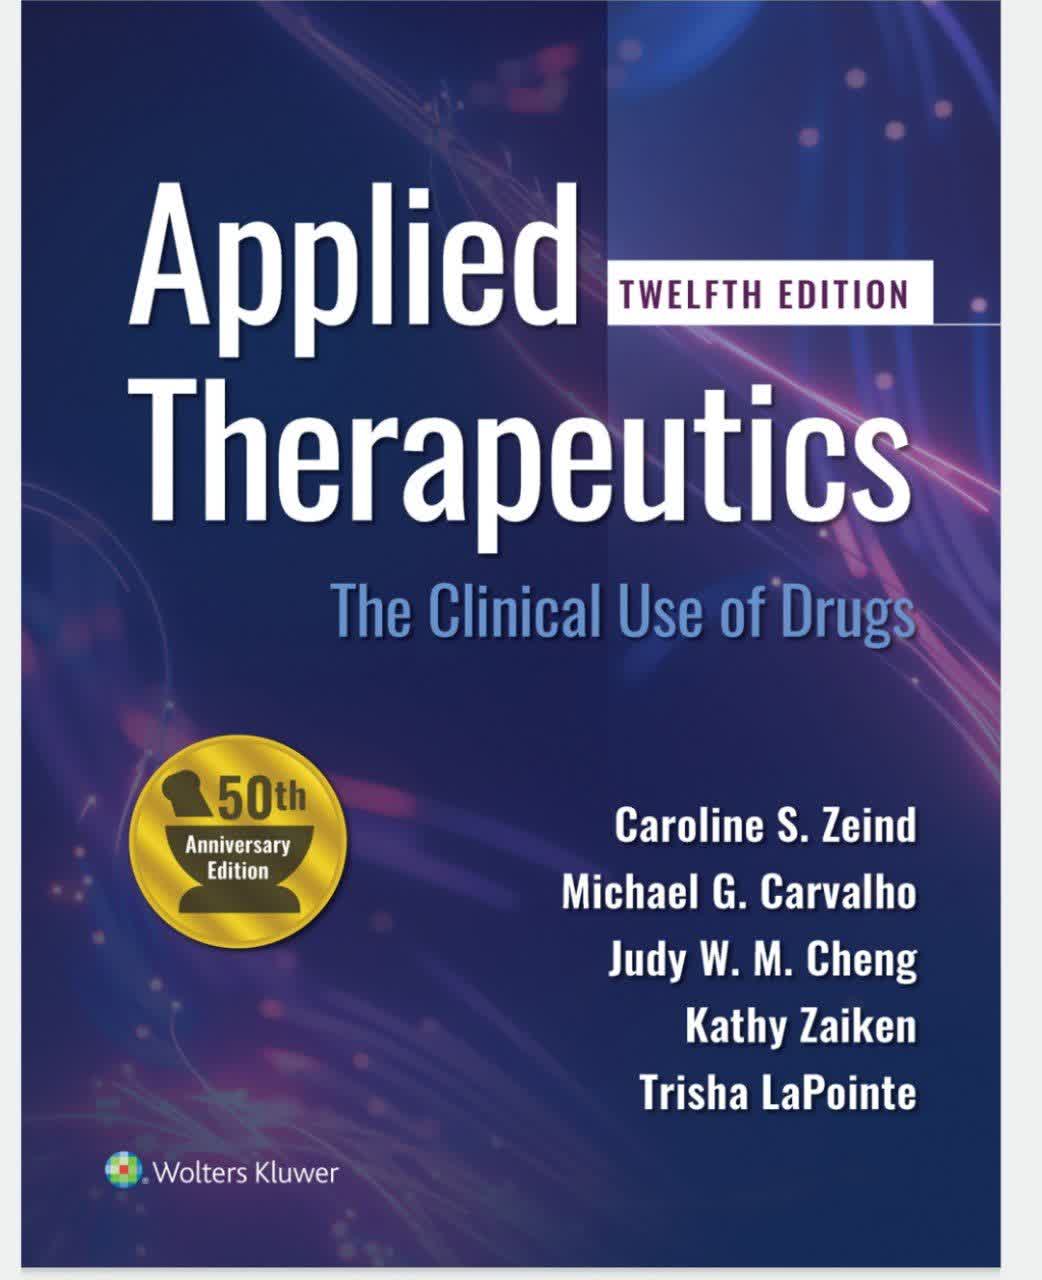 APPLIED THERAPEUTICS The Clinical Use of Drugs - اپلاید ترپیوتیکس نسخه ۲۰۲۴